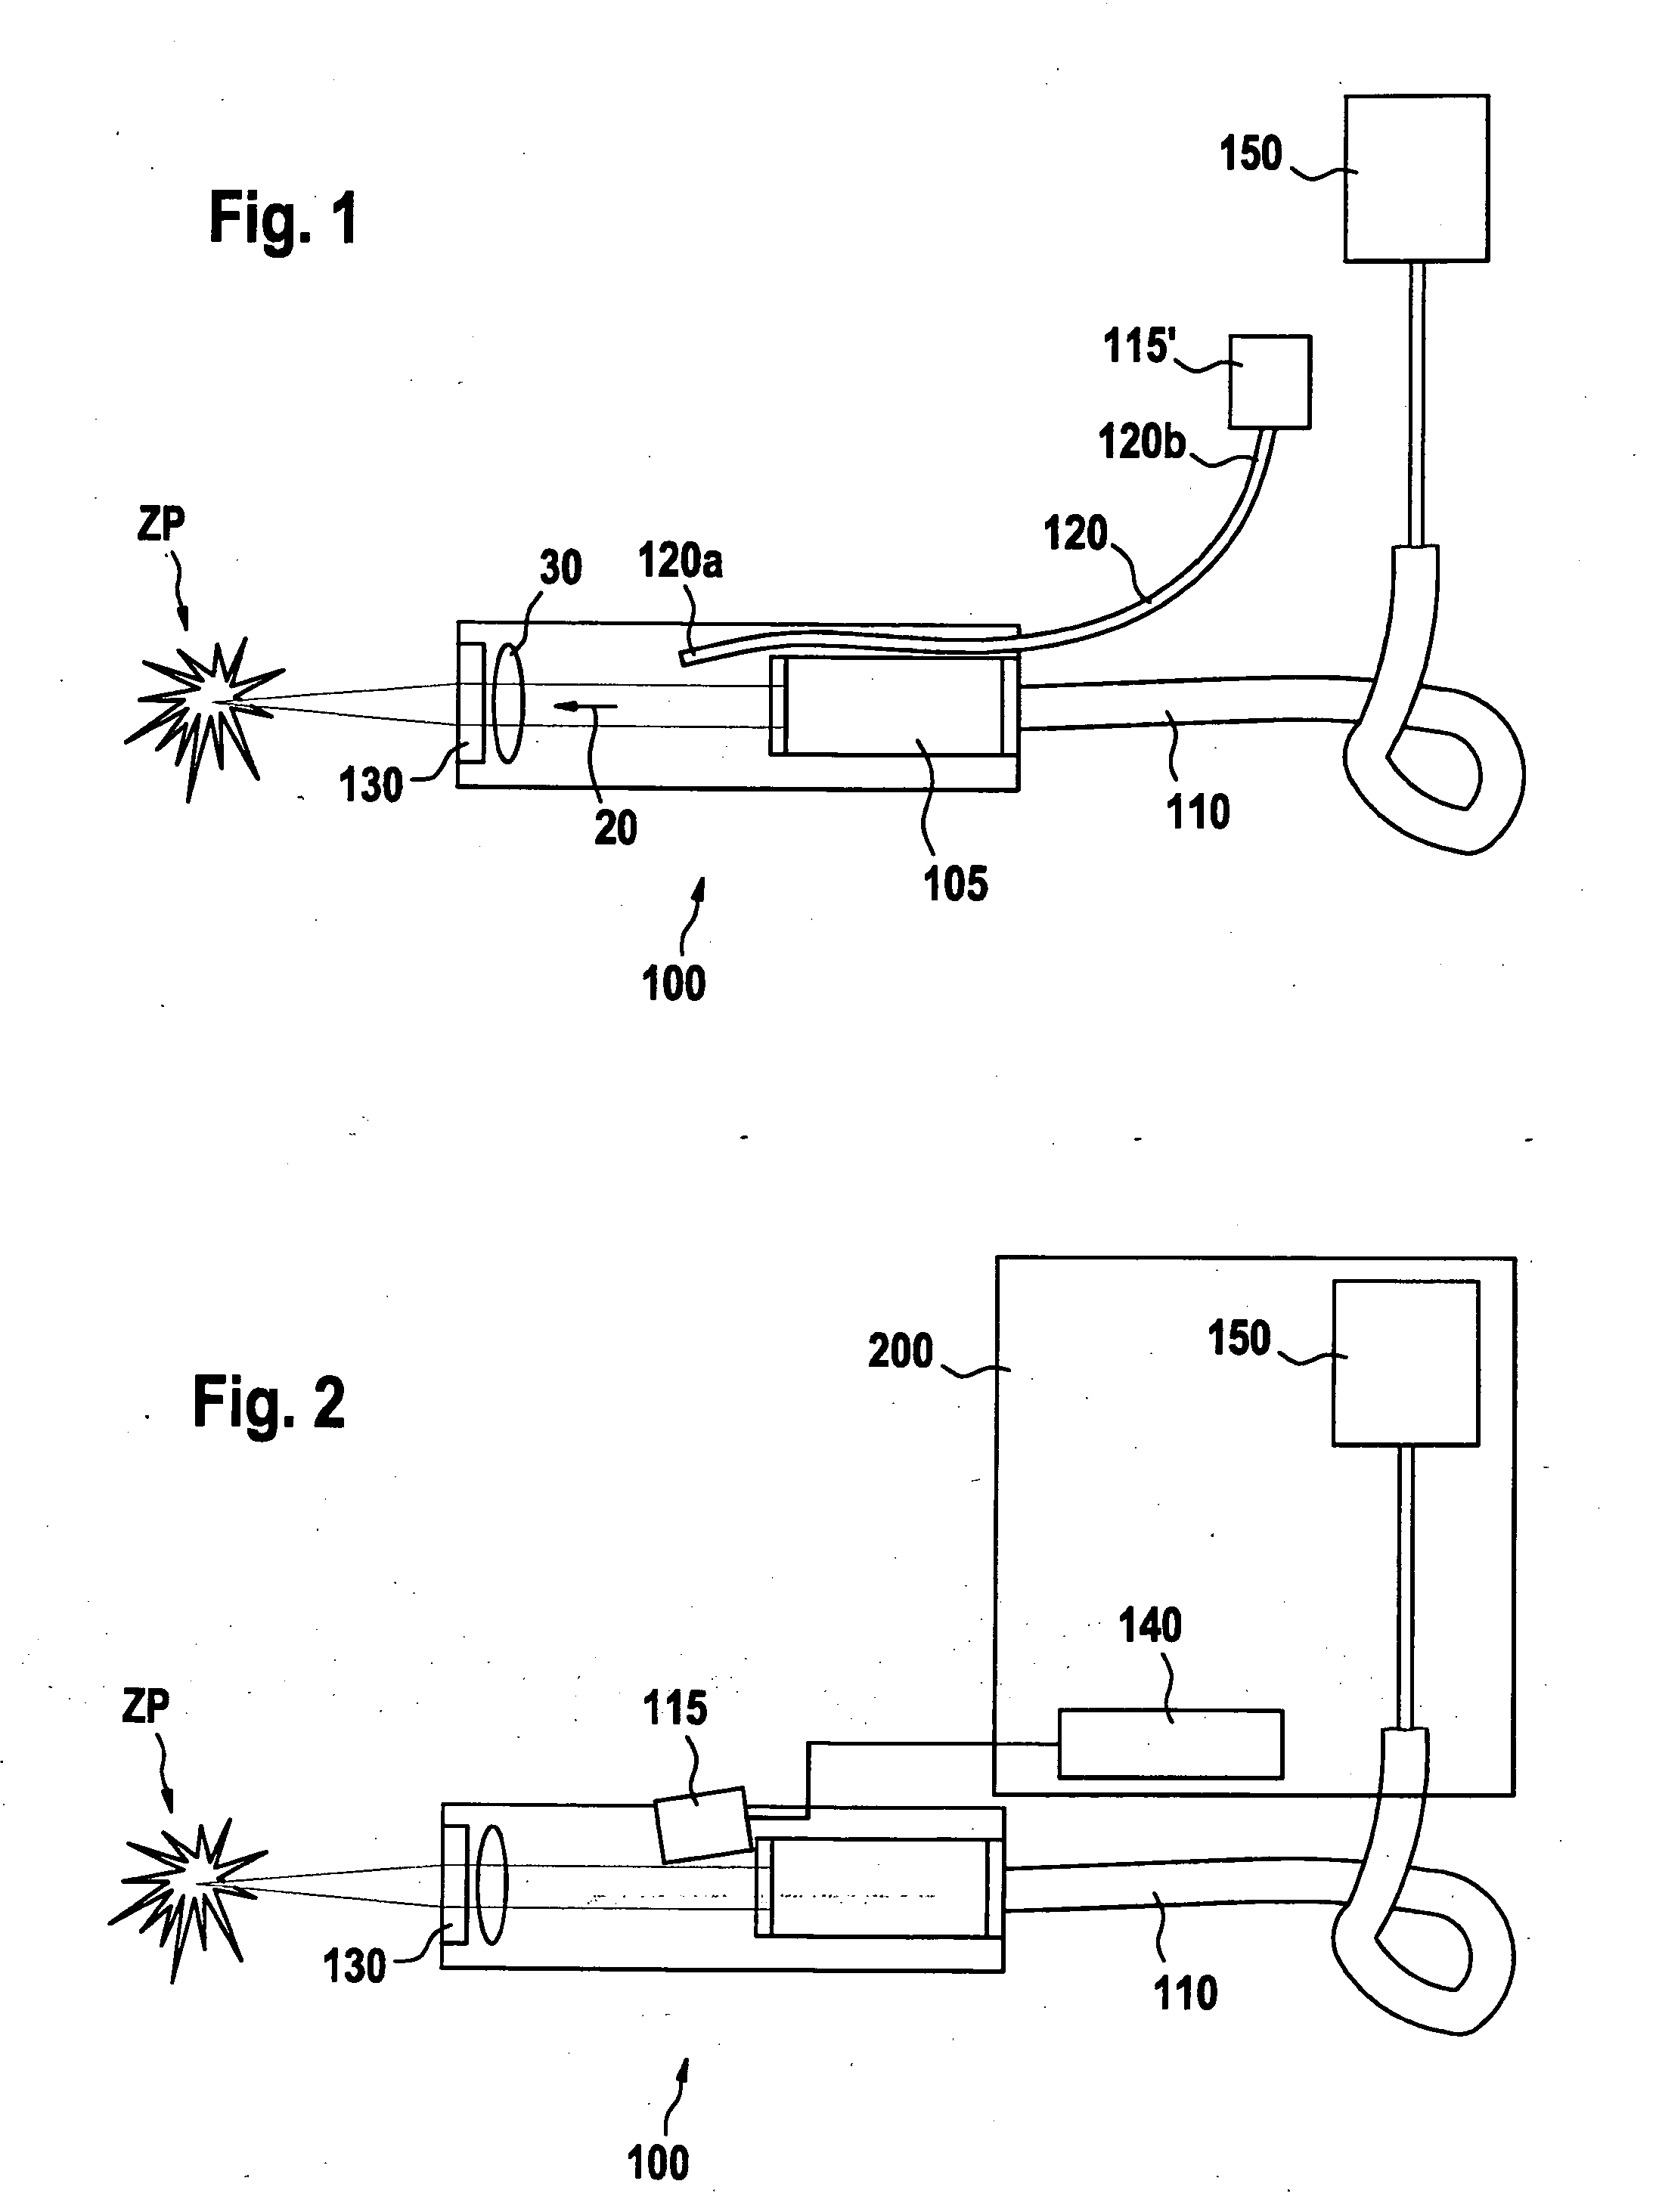 Spark Plug for an internal combustion engine and method for the operation thereof